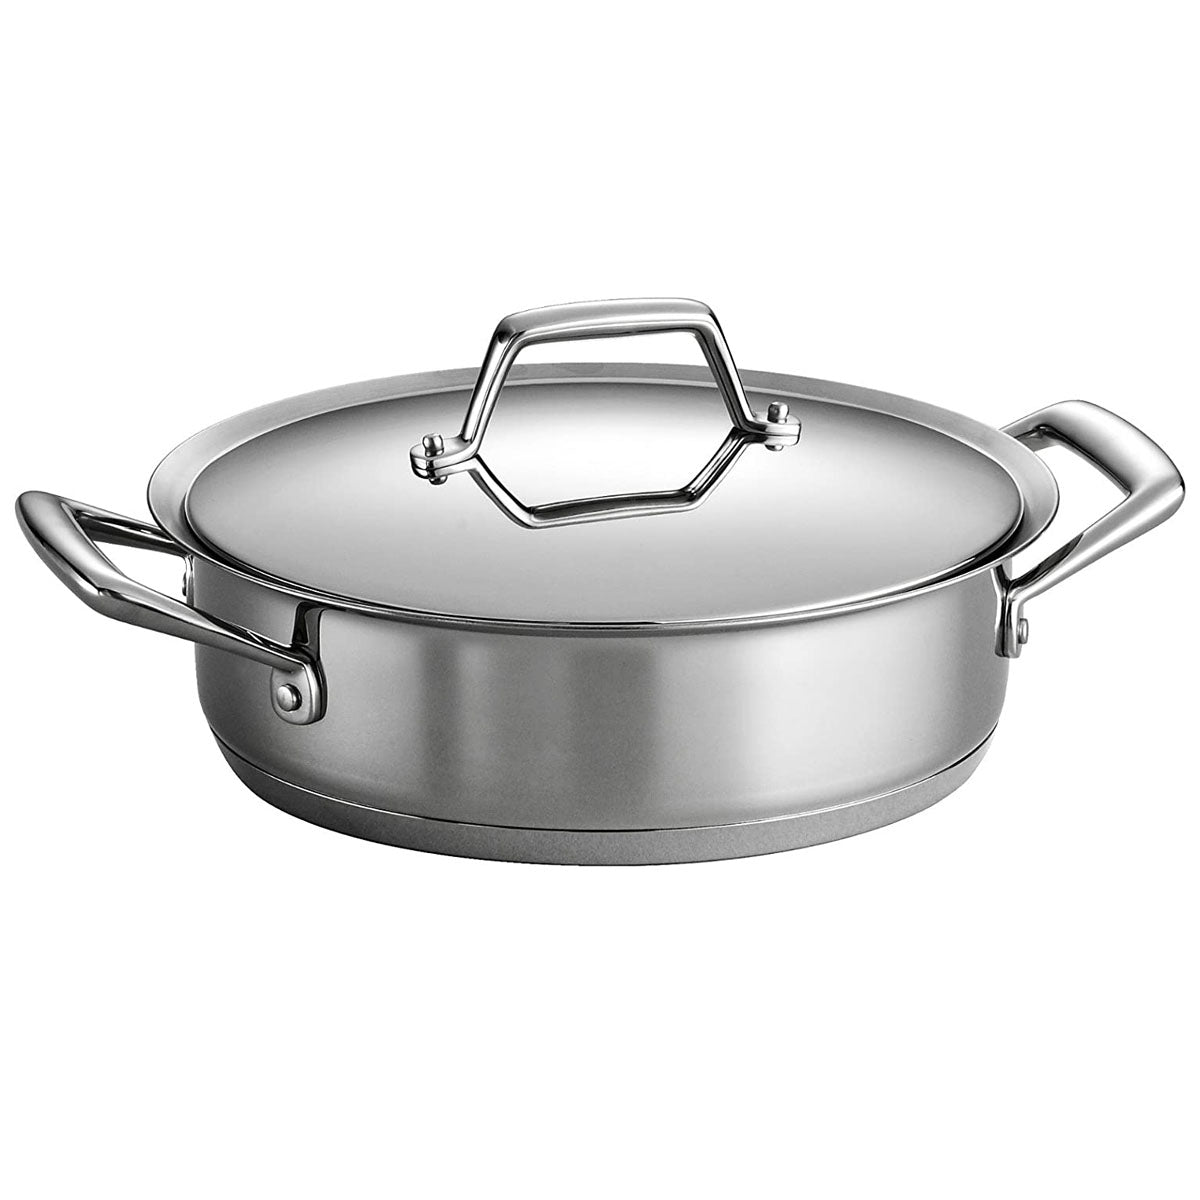 Tramontina Gourmet Prima 4-Quart Covered Sauce Pan with Tri-Ply Base 